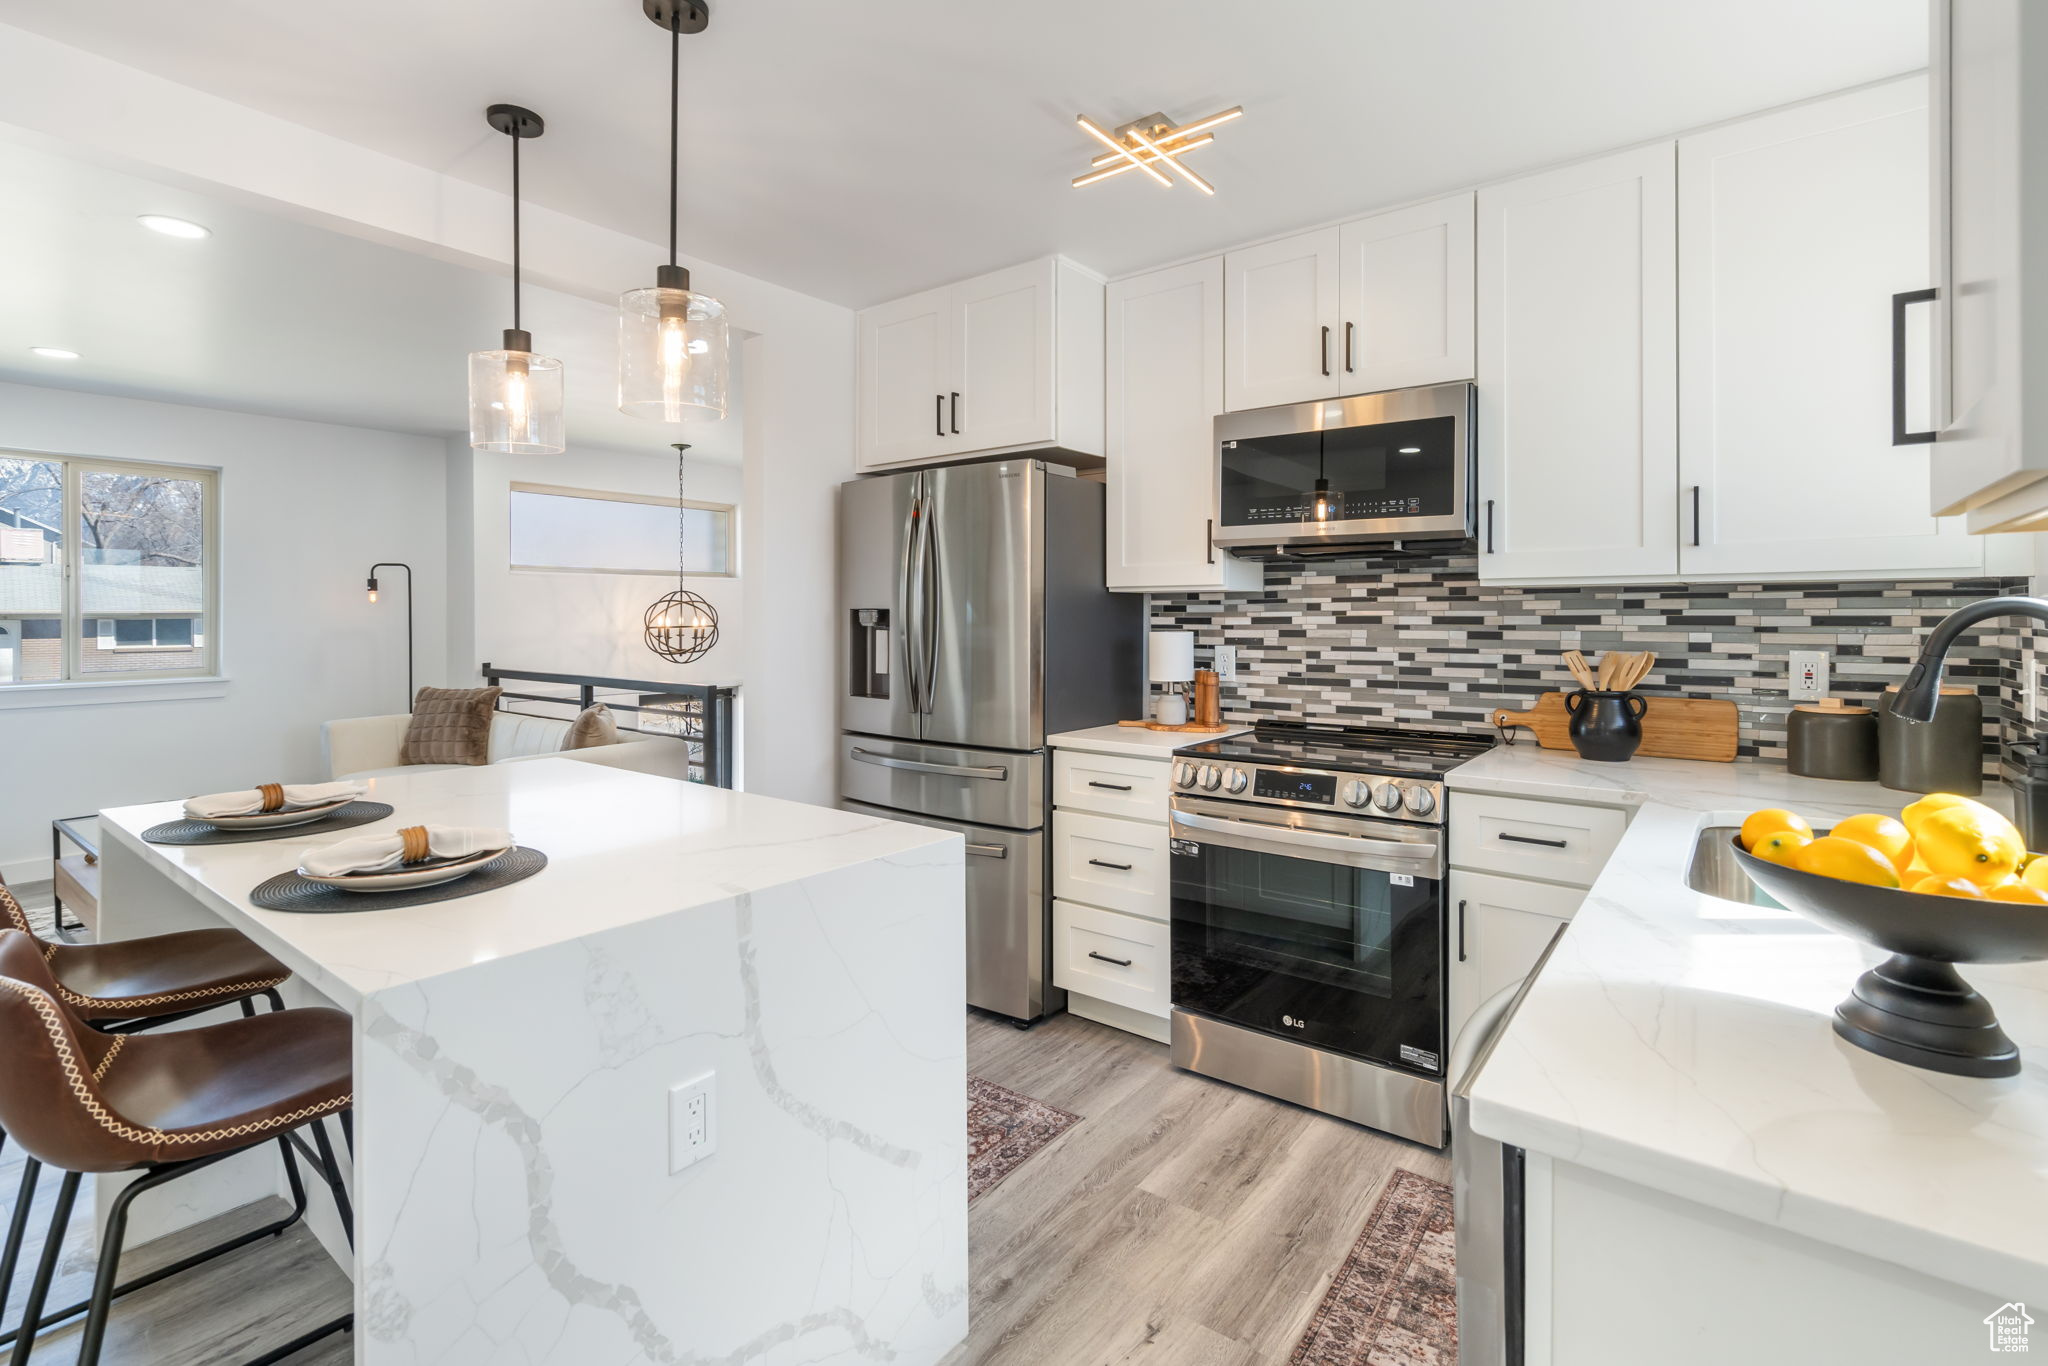 Kitchen featuring tasteful backsplash, stainless steel appliances, white cabinetry, and light wood-type flooring